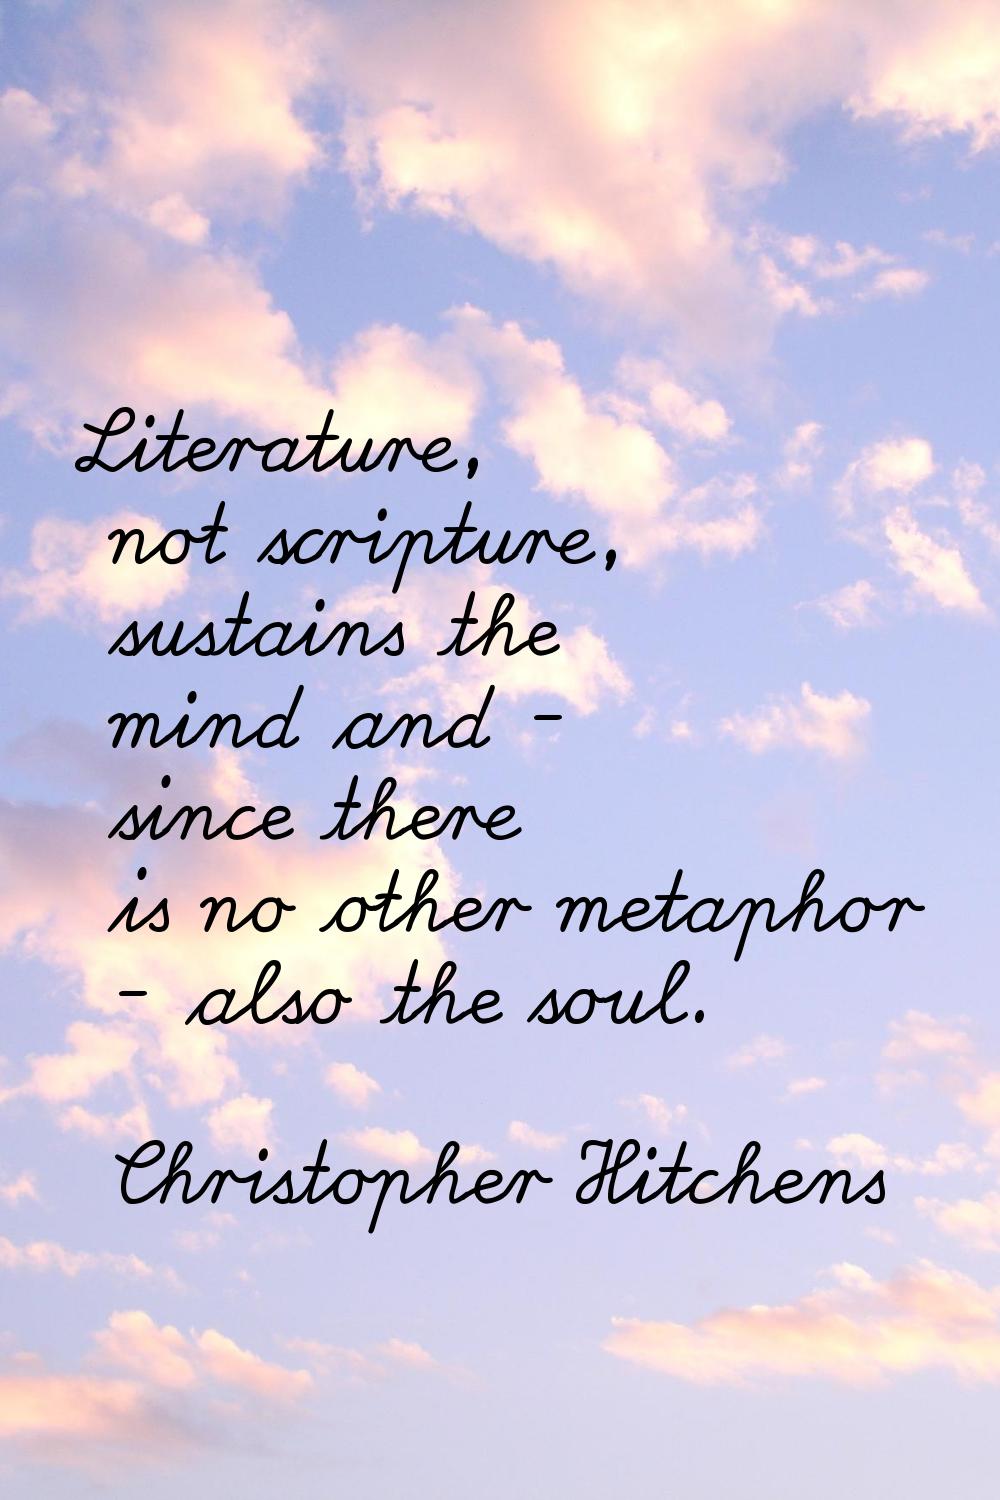 Literature, not scripture, sustains the mind and - since there is no other metaphor - also the soul